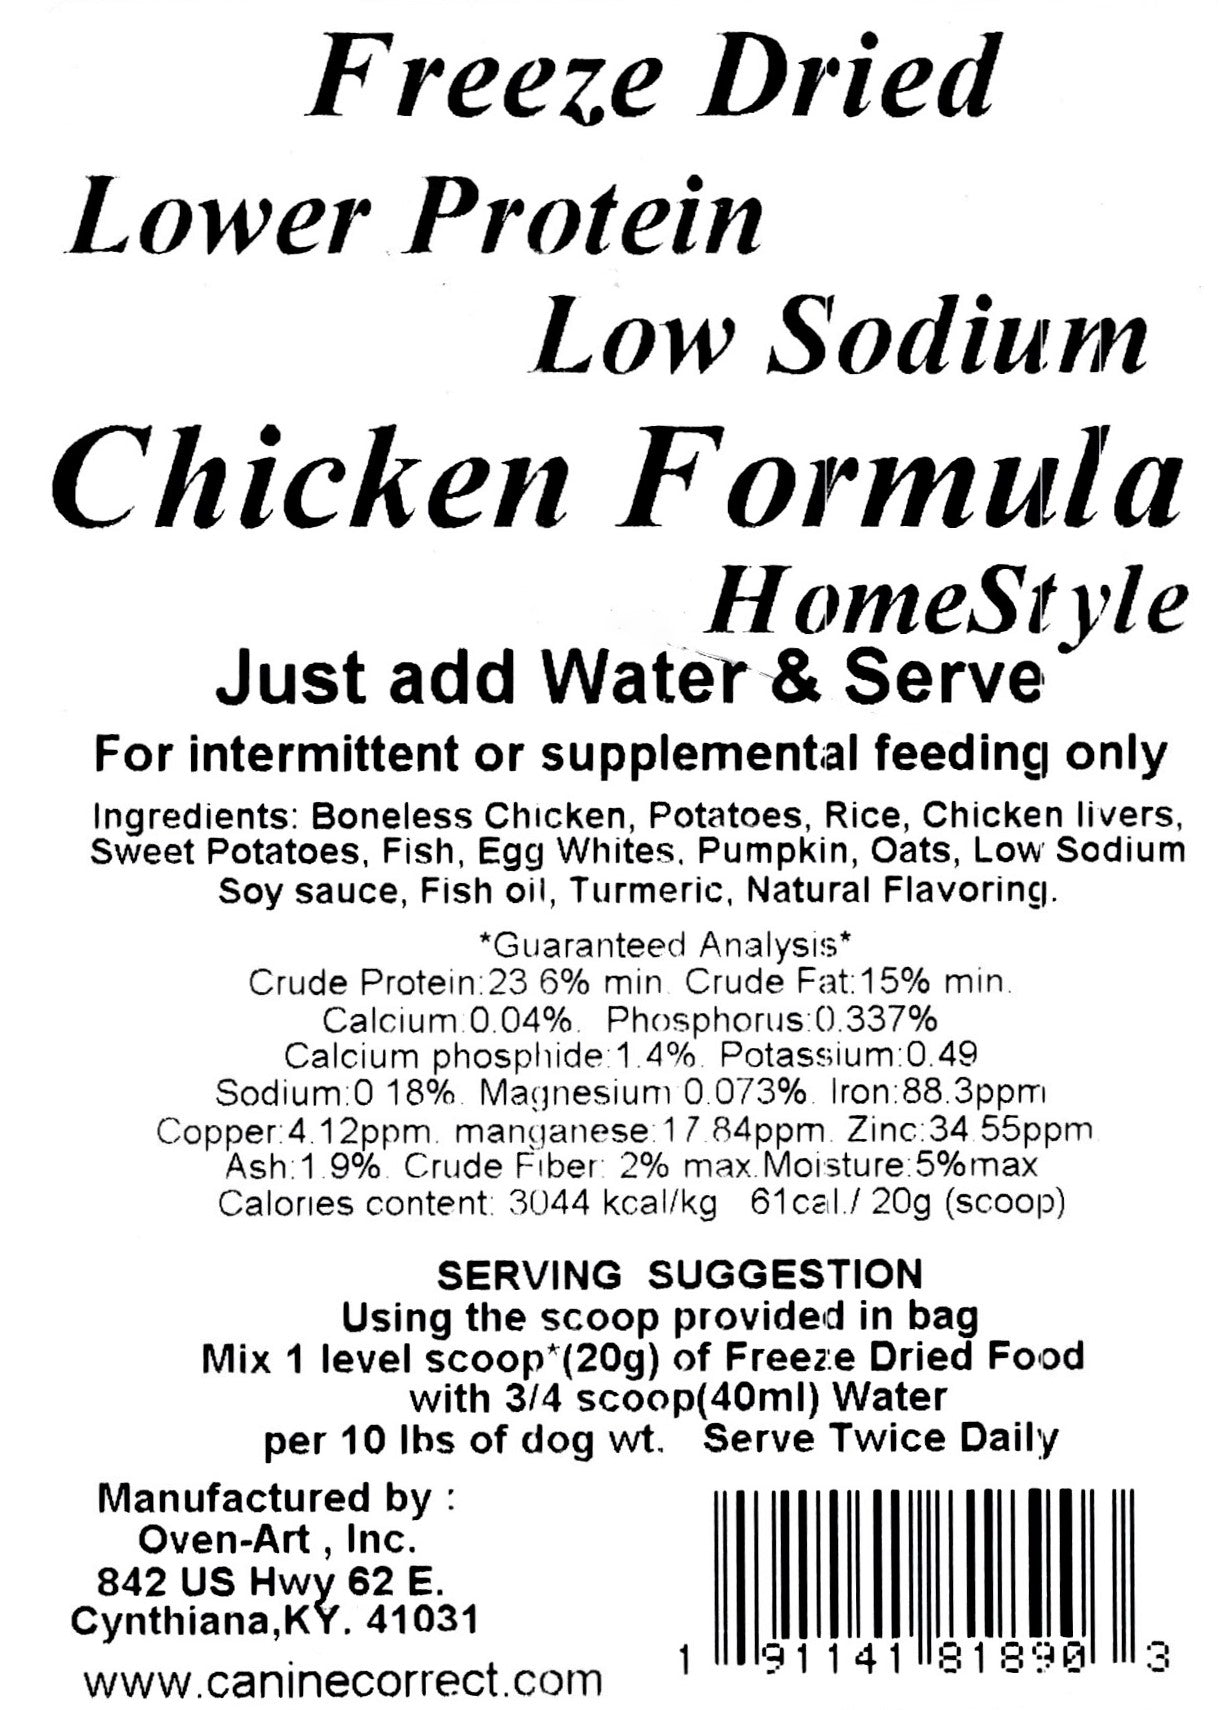 Canine Correct Lower Protein/Low Sodium Chicken Specialty Formula